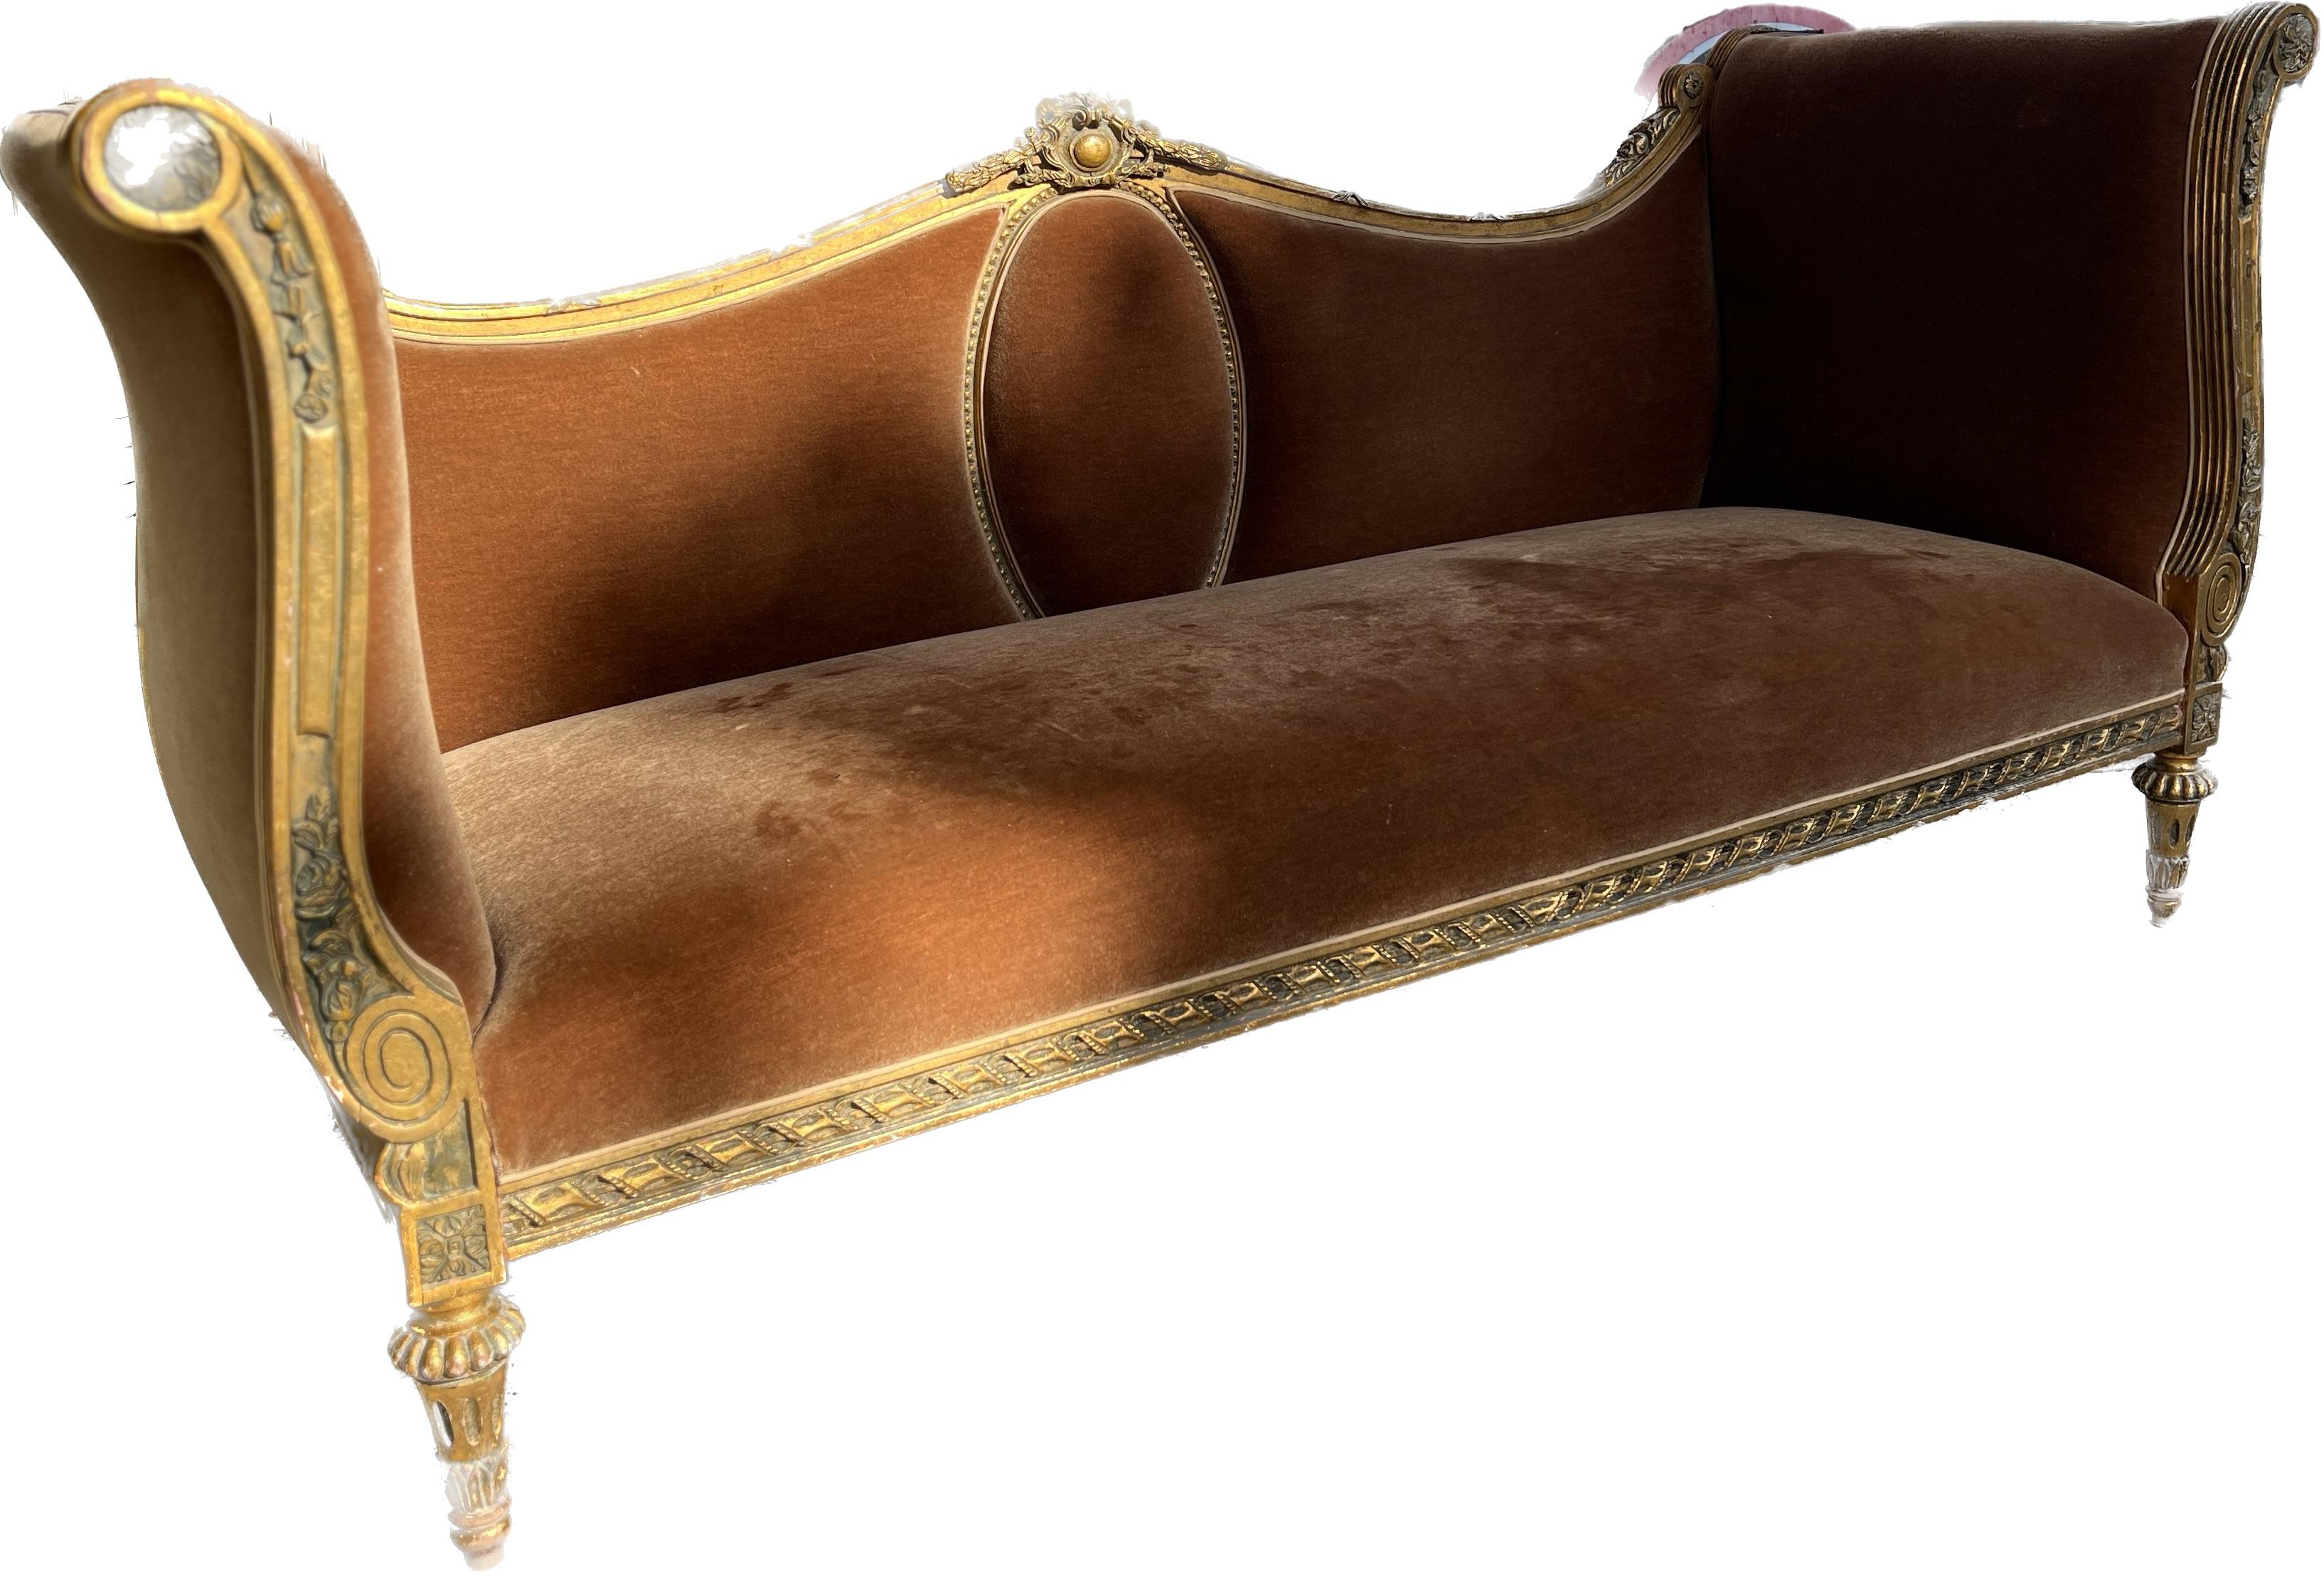 1950s Gilt French Couch in Mohair In Good Condition For Sale In Tarrytown, NY